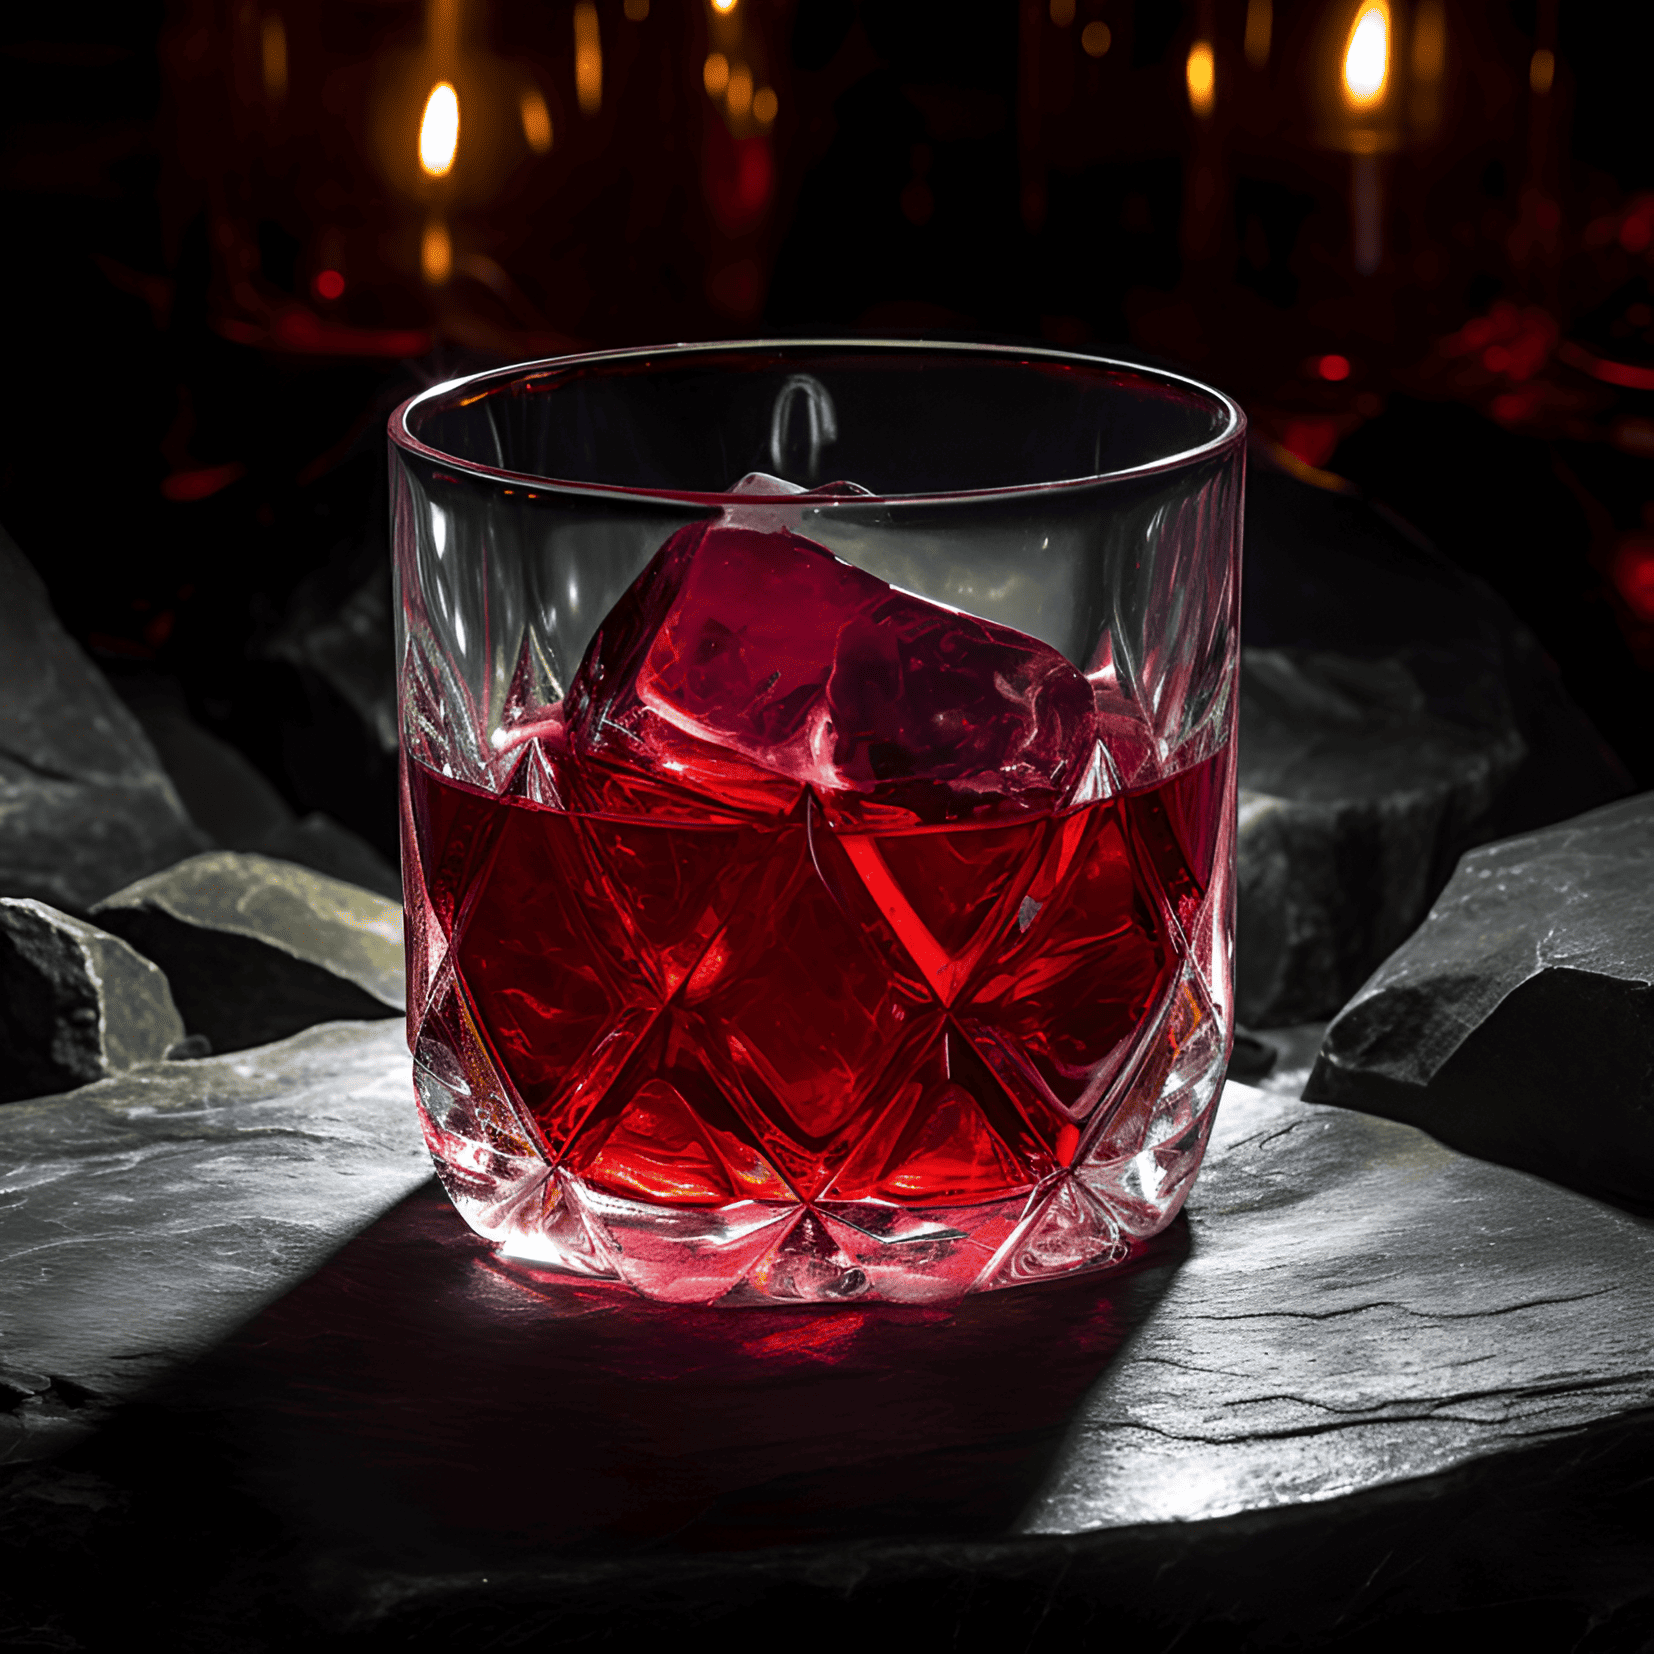 Zorro Cocktail Recipe - The Zorro cocktail is a complex and intriguing blend of flavors, with a strong, bold taste that is both sweet and sour. The combination of rum, lime juice, and grenadine creates a rich and fruity flavor, while the addition of bitters adds a subtle hint of spice and depth.